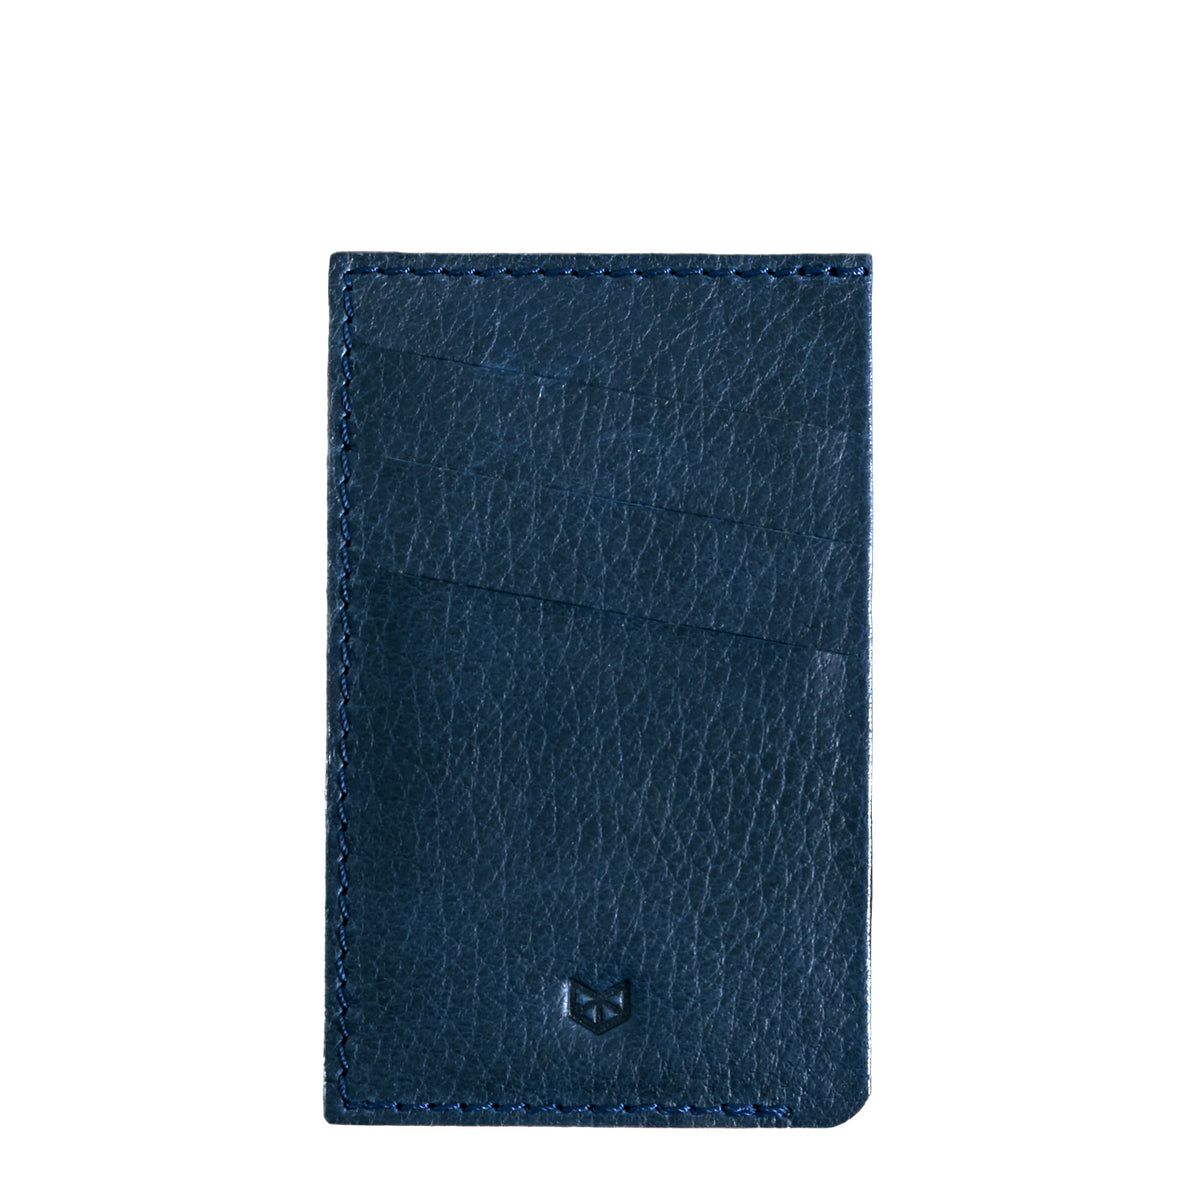 Front Cover. Card Holder Wallet Blue by Capra Leather